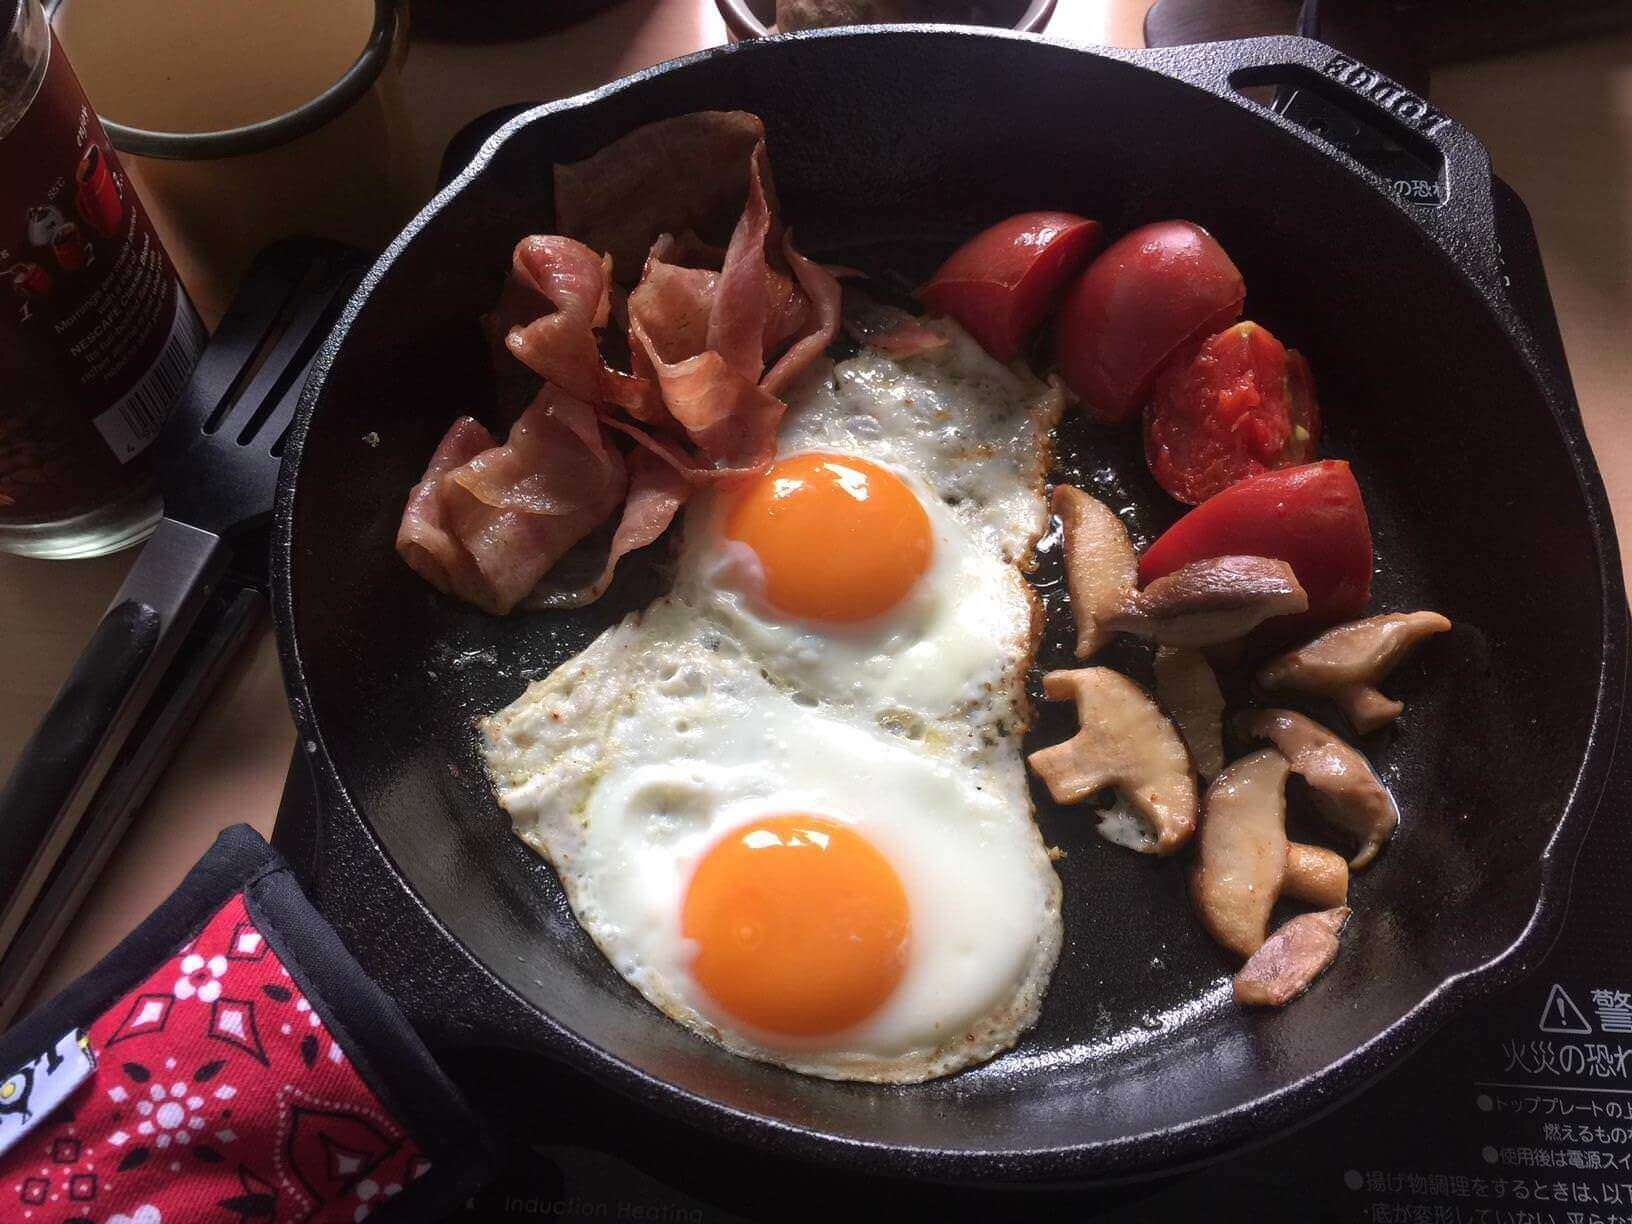 Learn about the benefits of enameled cast iron cookware. – Boonie Hicks